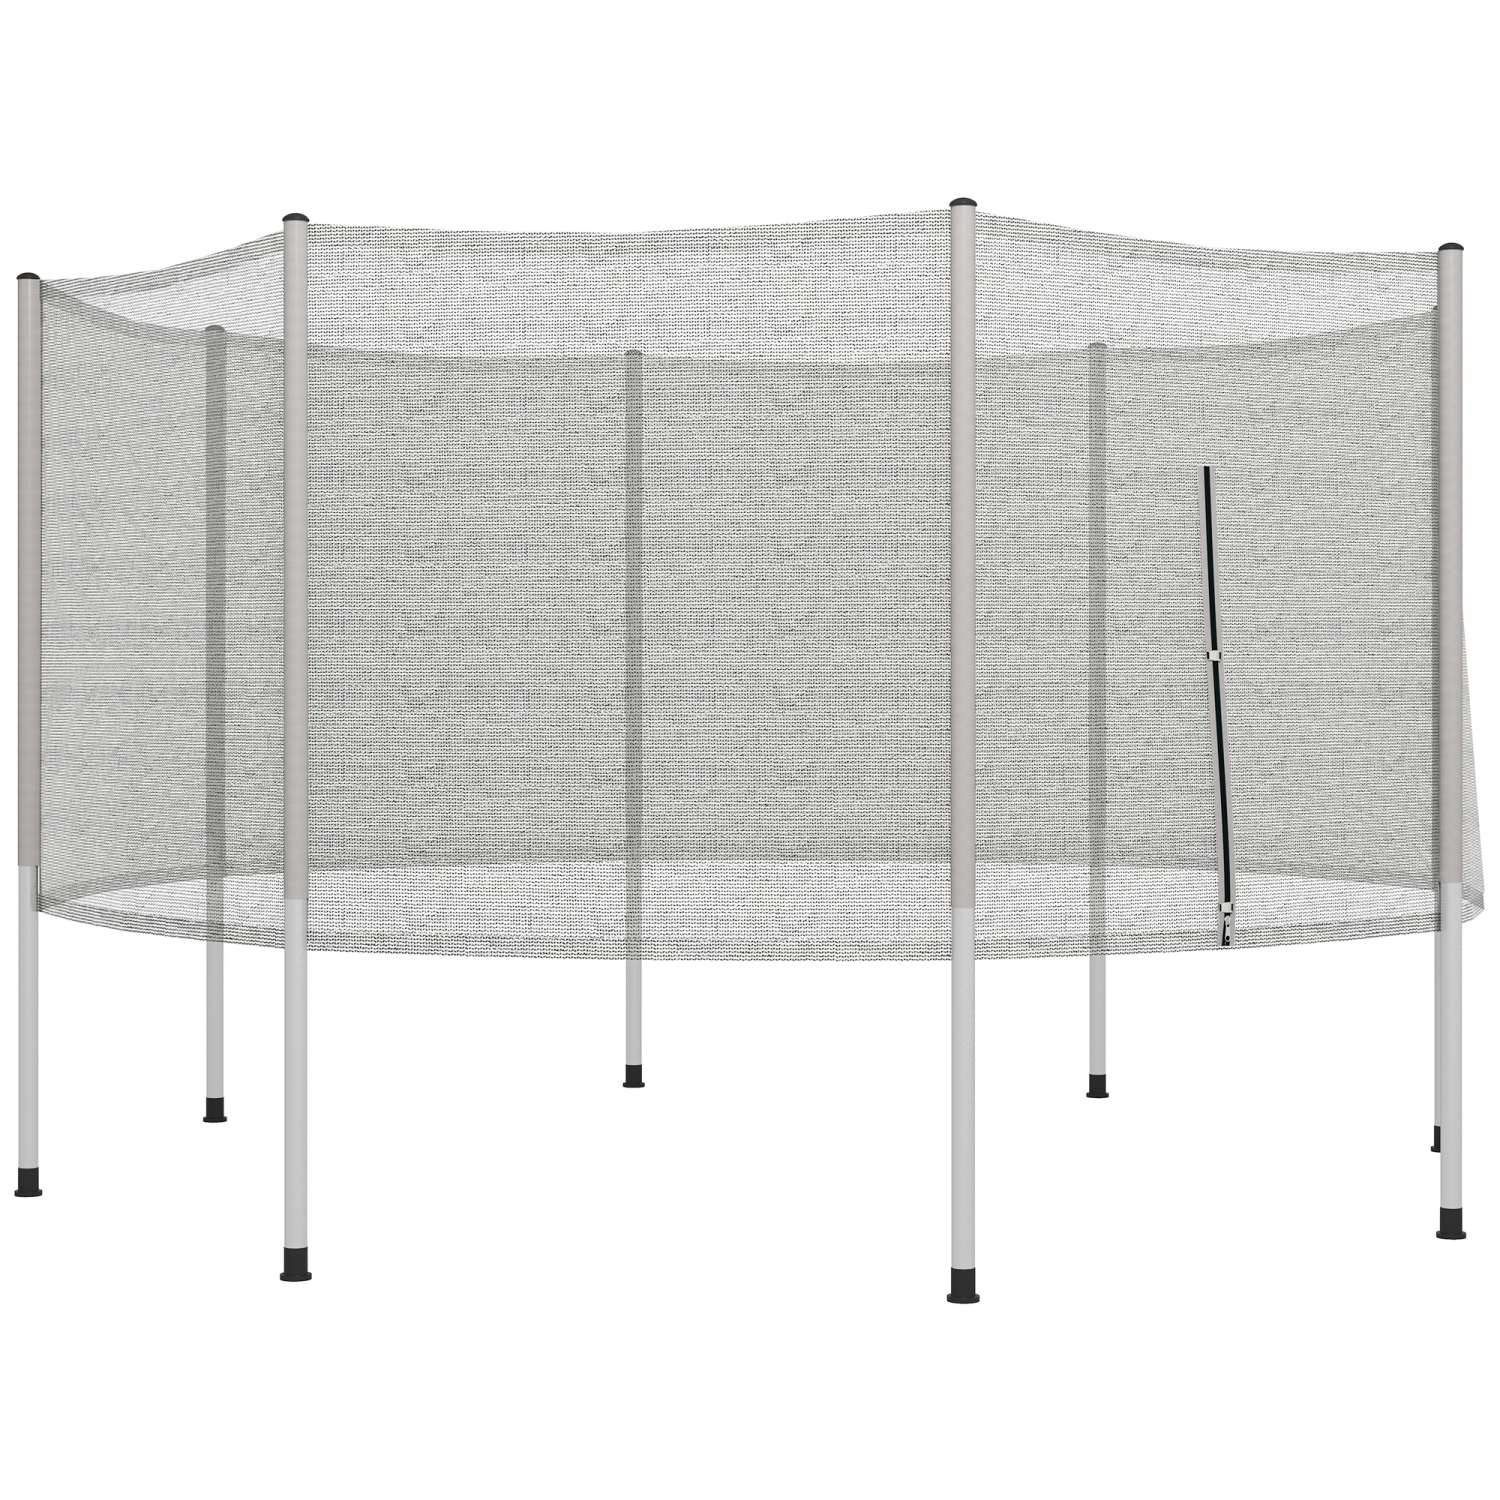 Soozier 14FT Trampoline Net Enclosure Trampolining Bounce Safety Accessories w/ 8 Poles, Grey